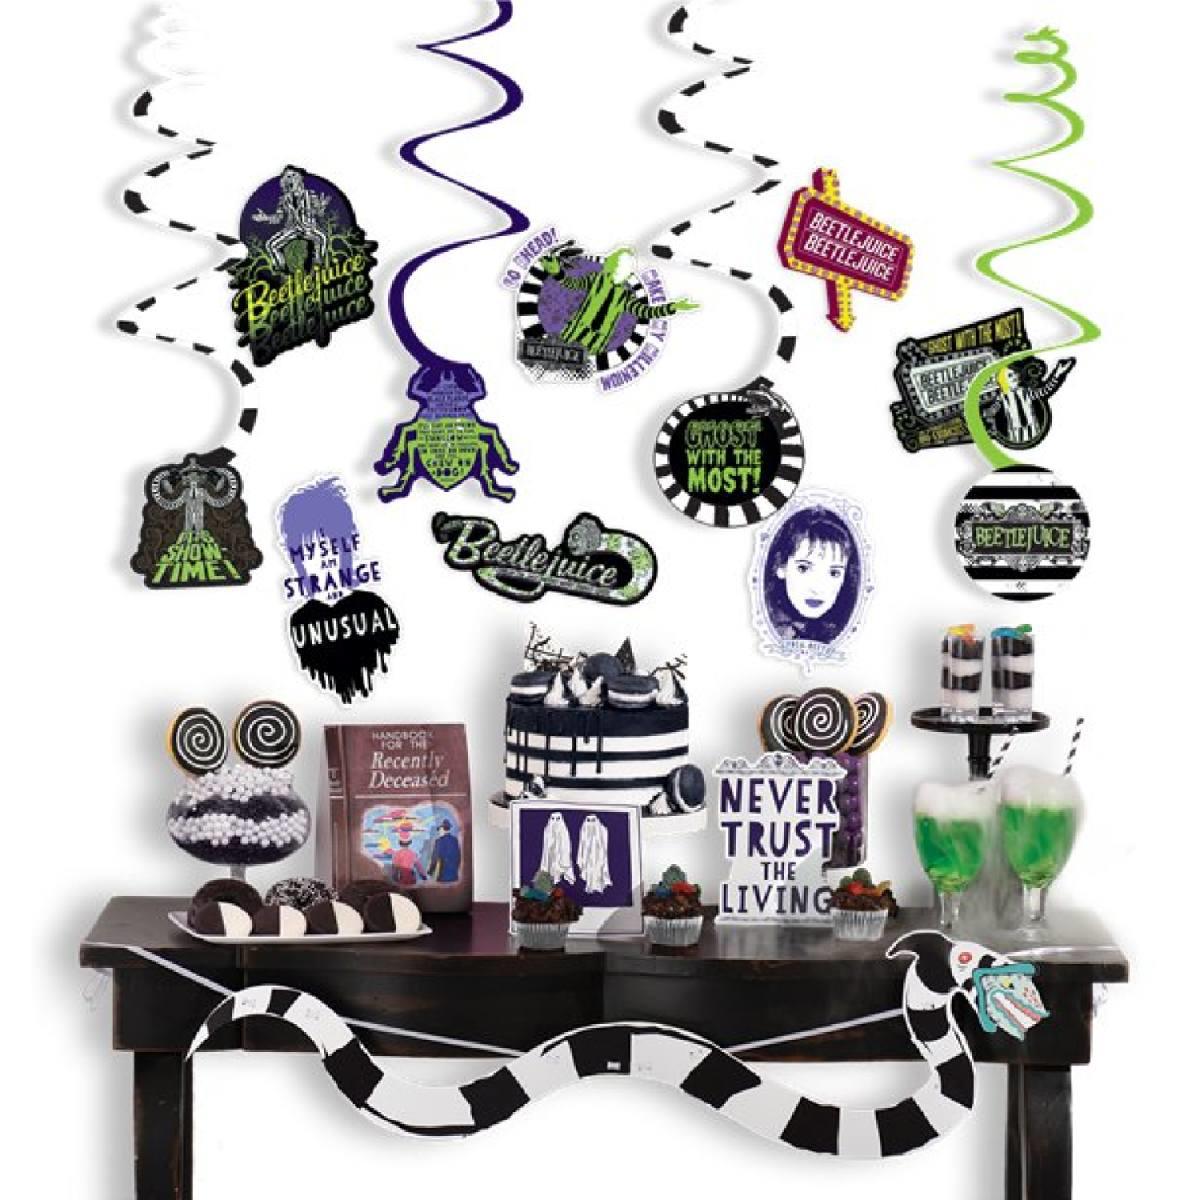 Beetlejuice Room Decoration Pack 24pc by Amscan 243853 available here at Karnival Costumes online party shop